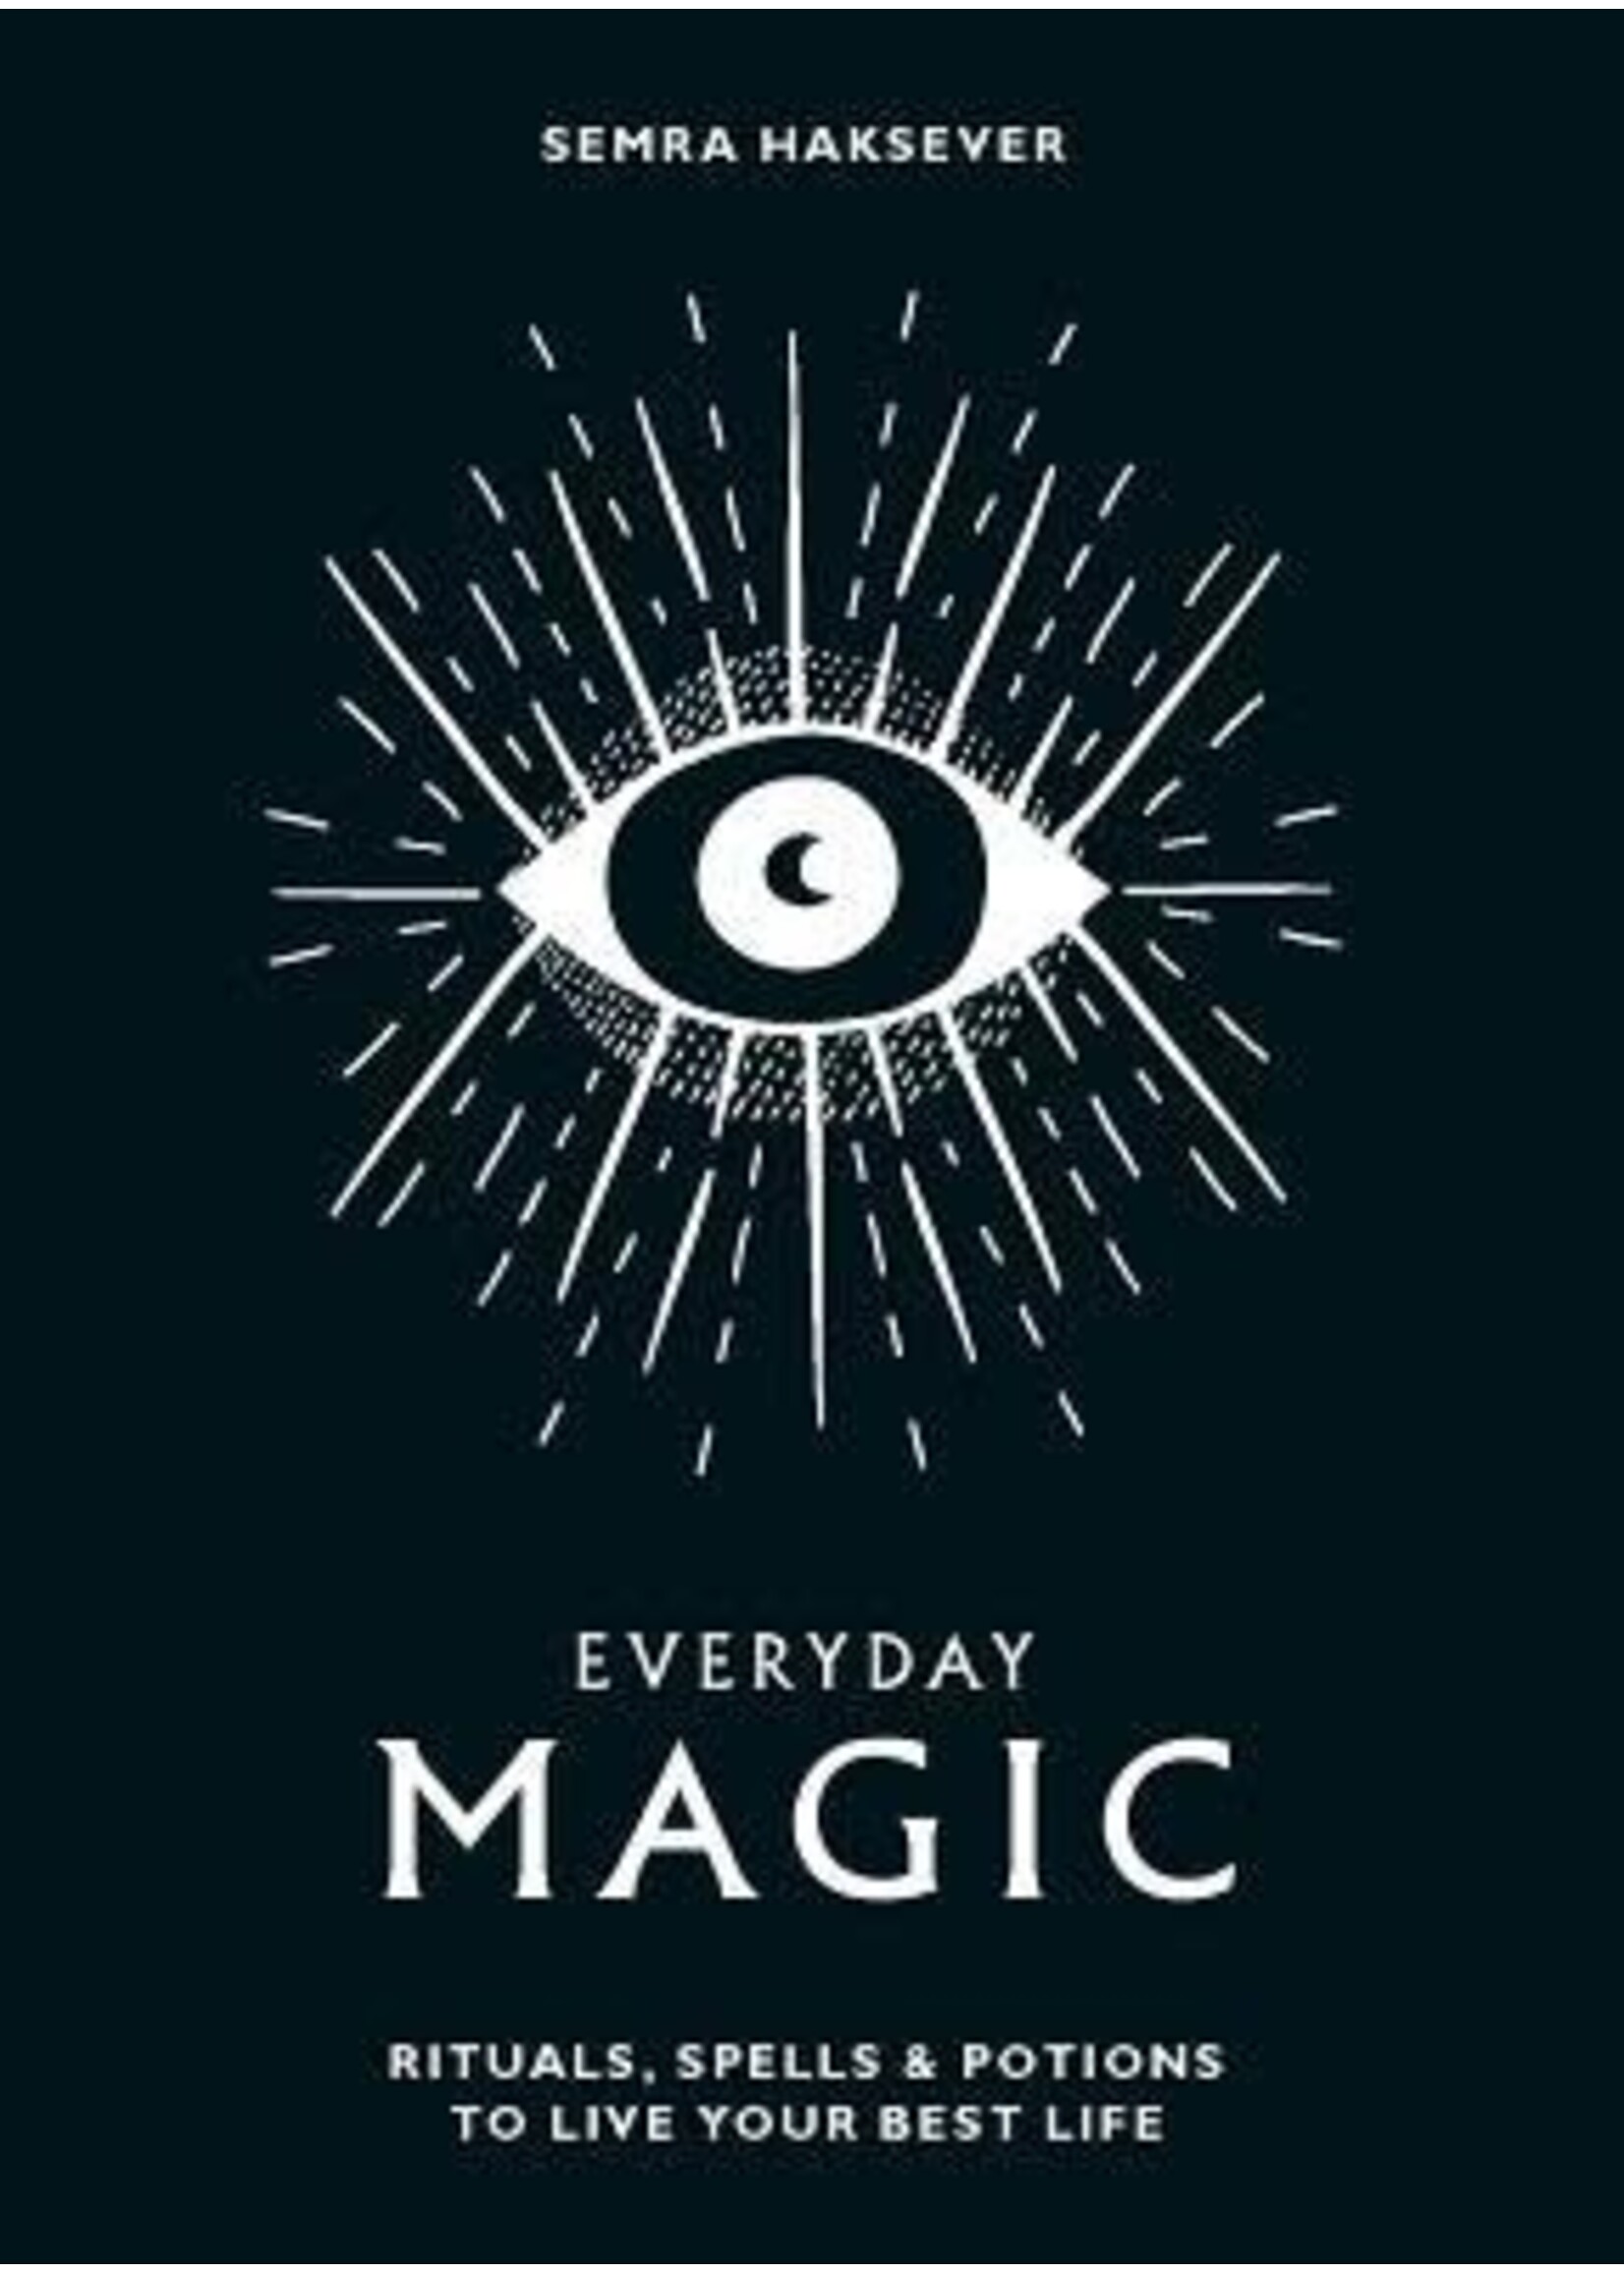 Everyday Magic: Rituals, Spells Potions to Live Your Best Life by Semra Haksever